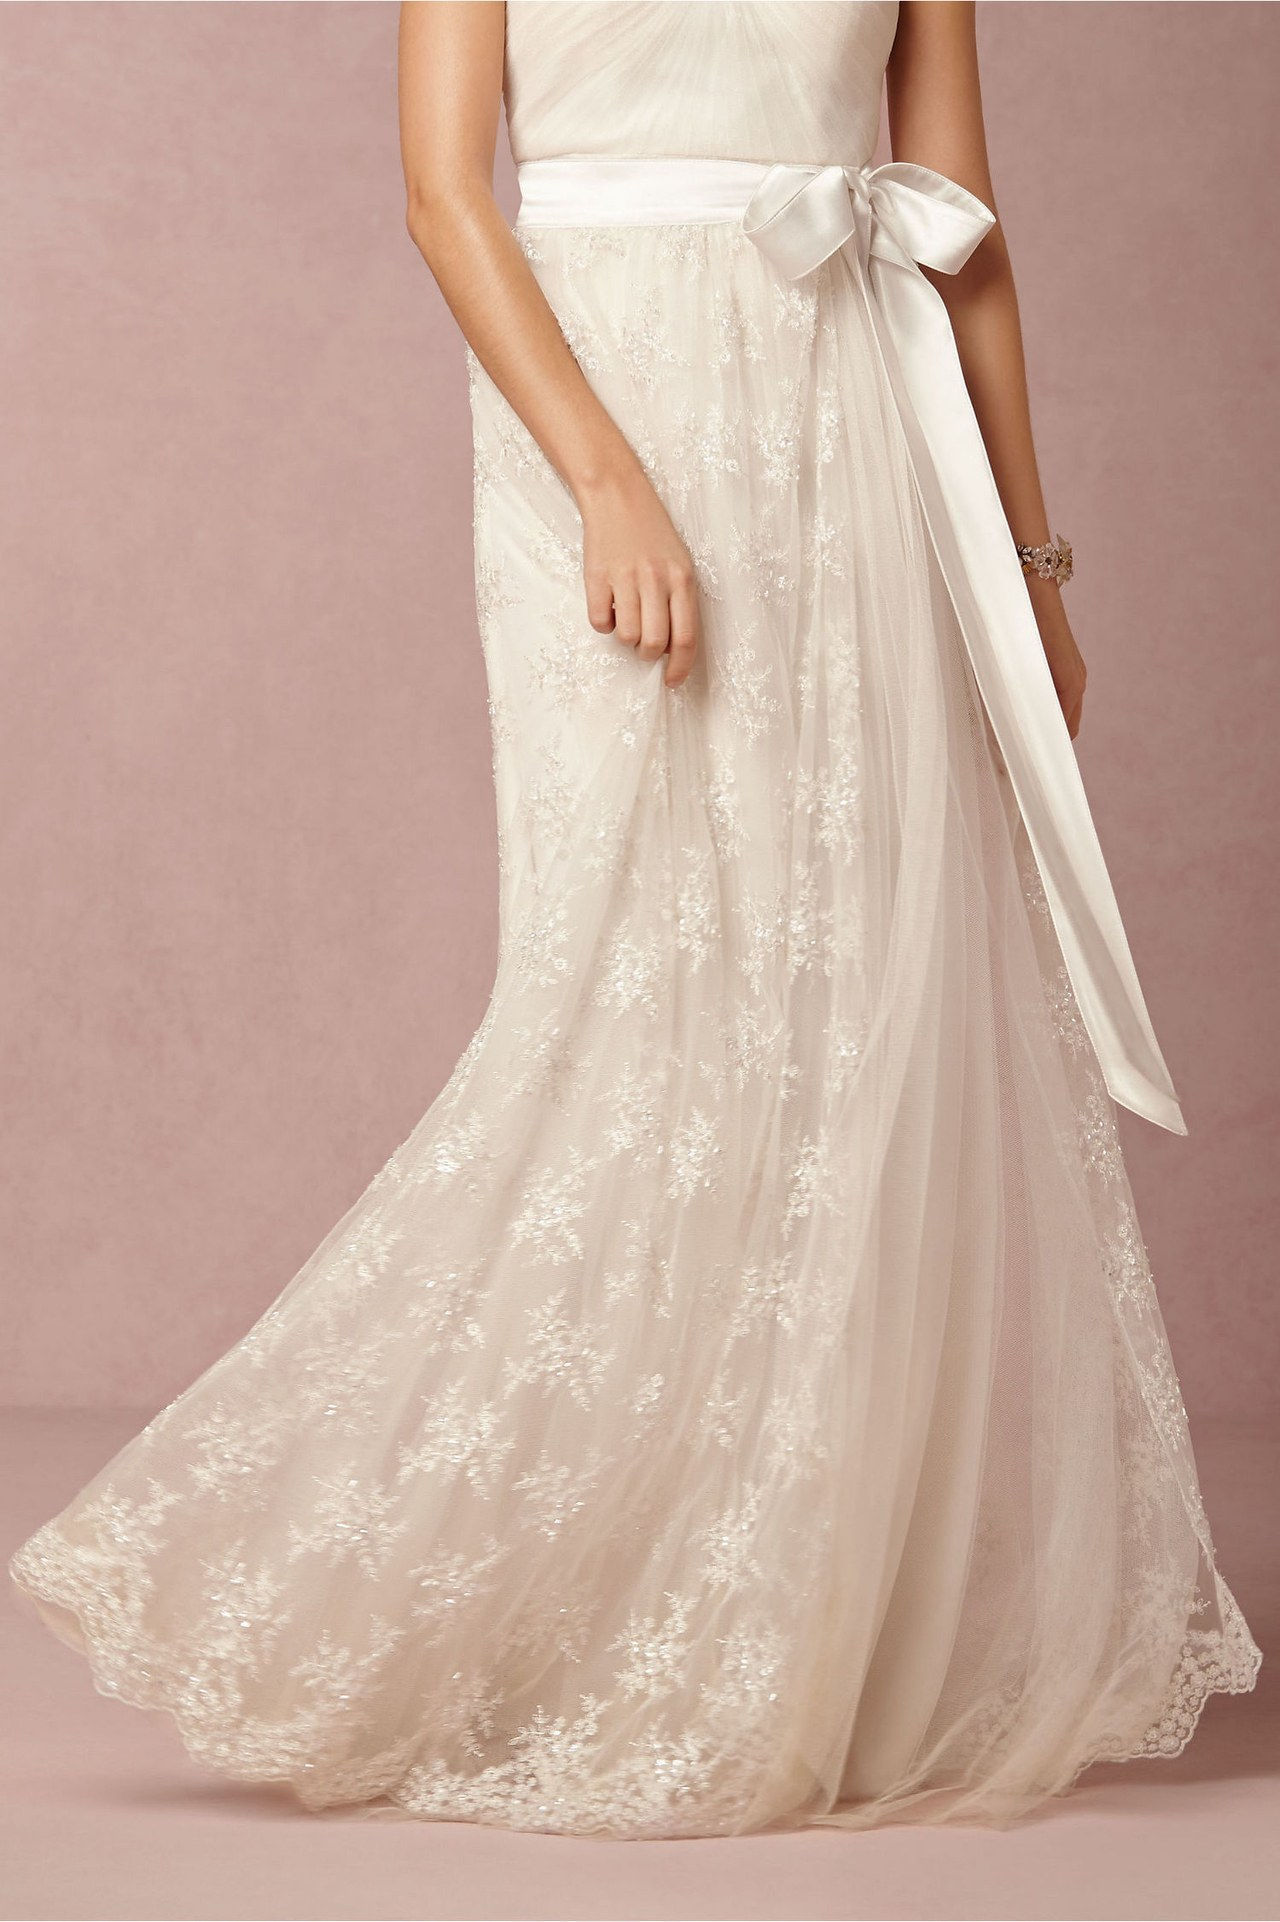 2C 2 in 1 wedding dresses wedding gowns mix and match wedding dresses bhldn 0430 courtesy